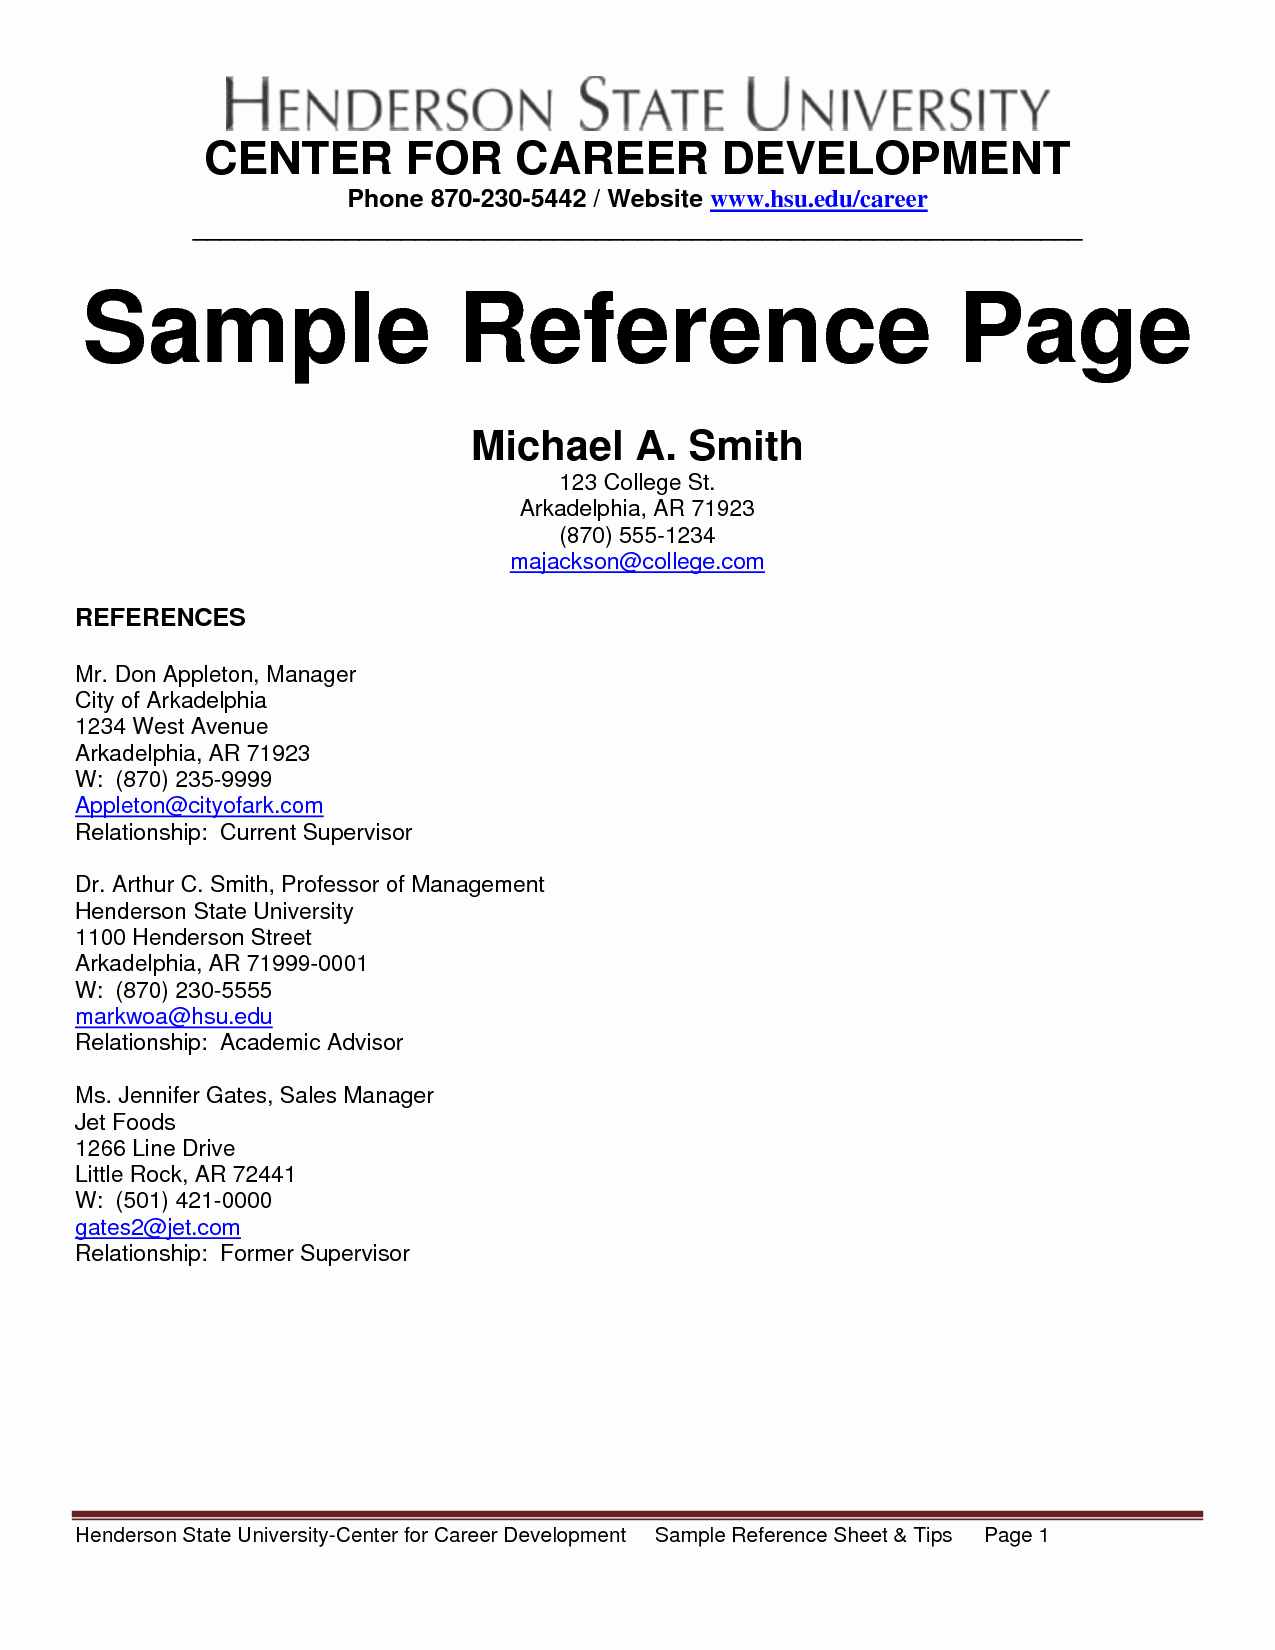 Sample Reference List for Jobs Unique Reference Page Template